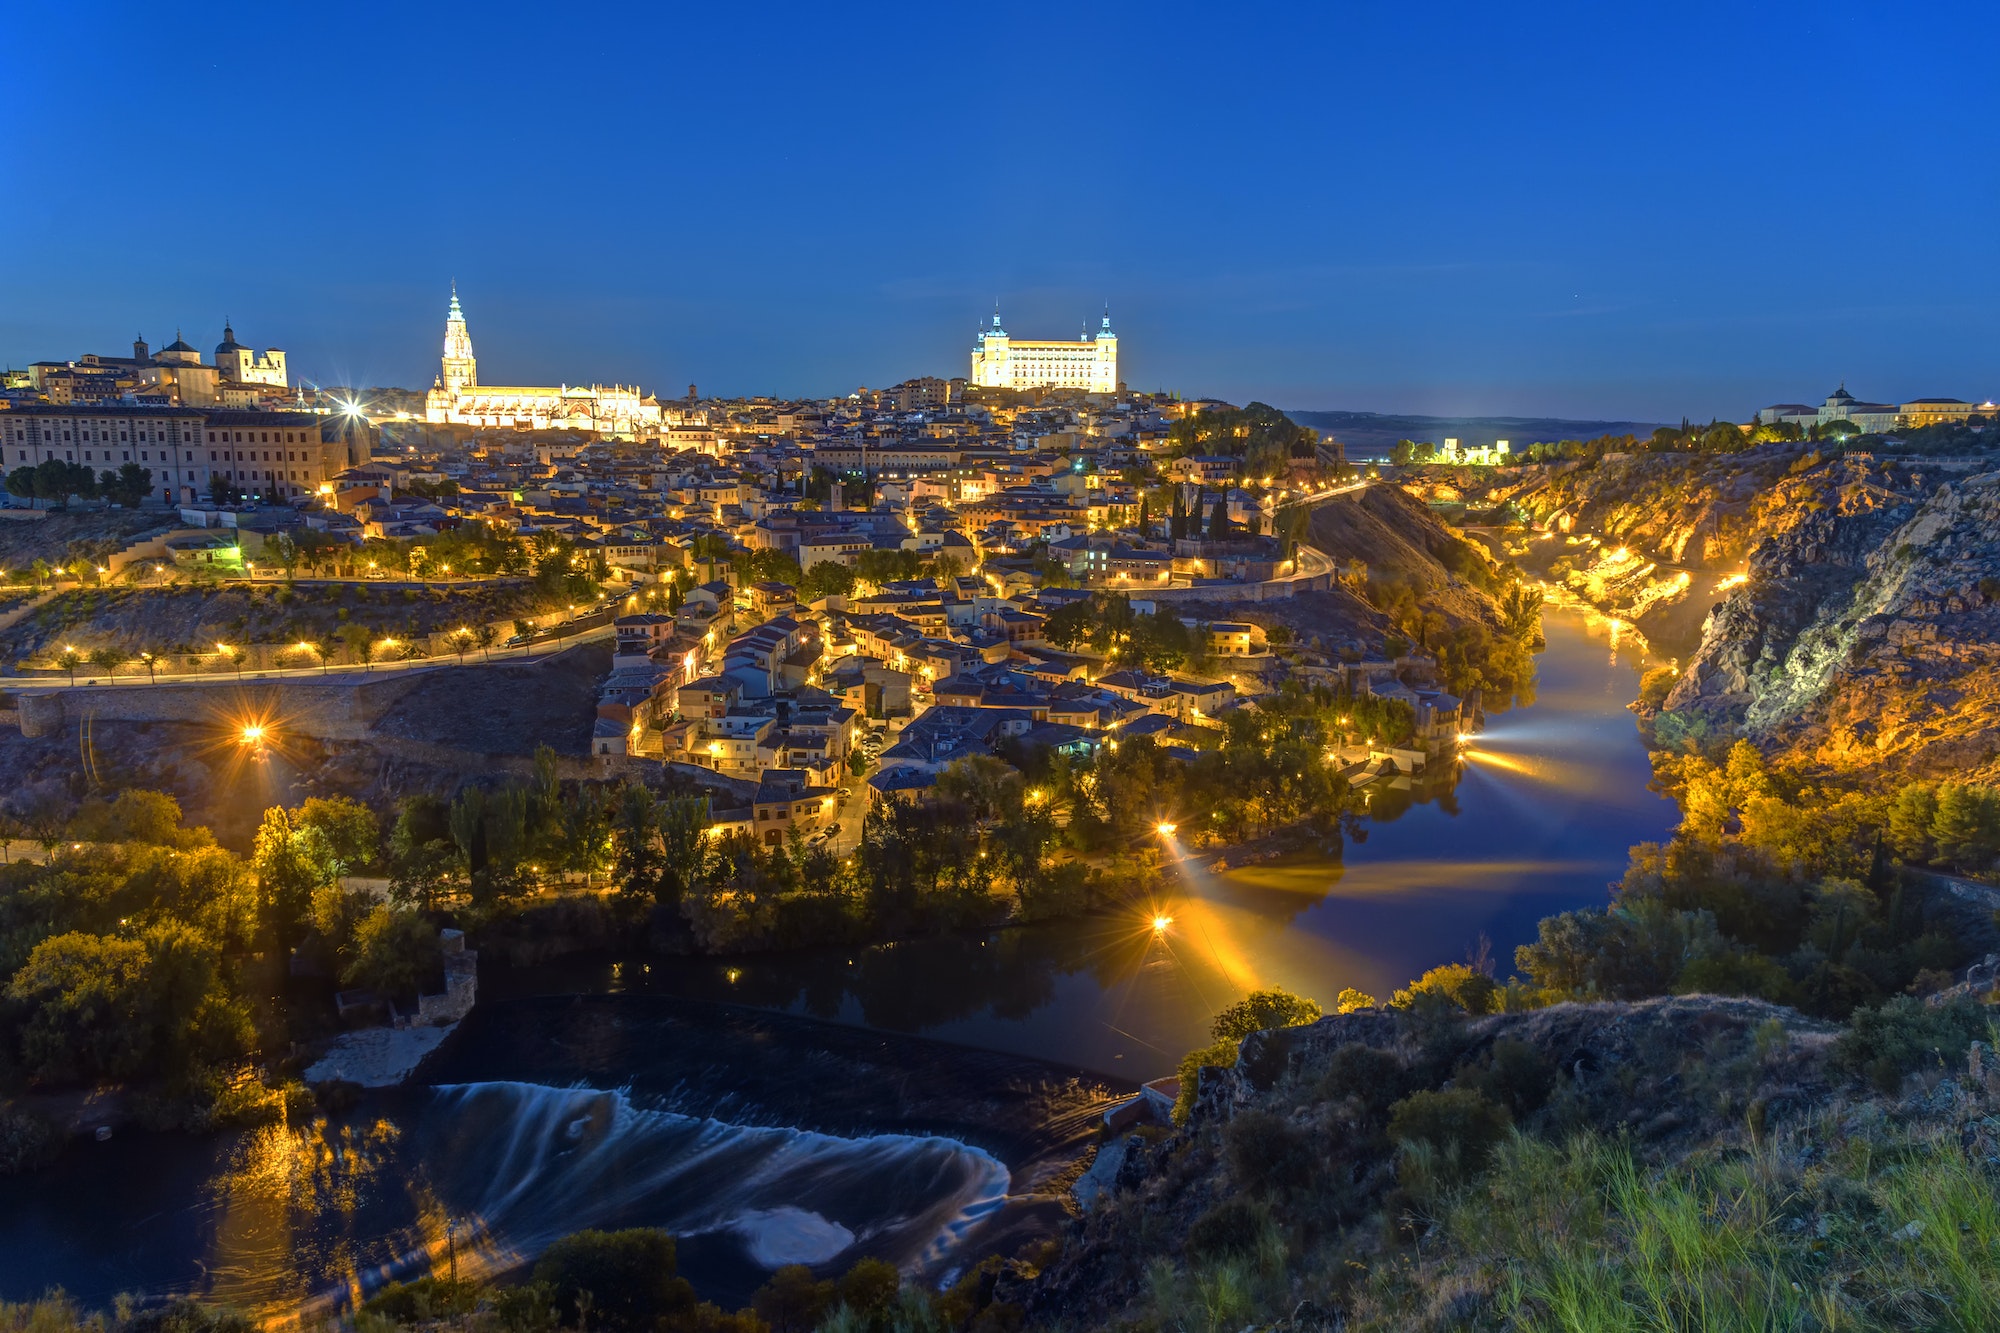 The historic old city of Toledo in Spain